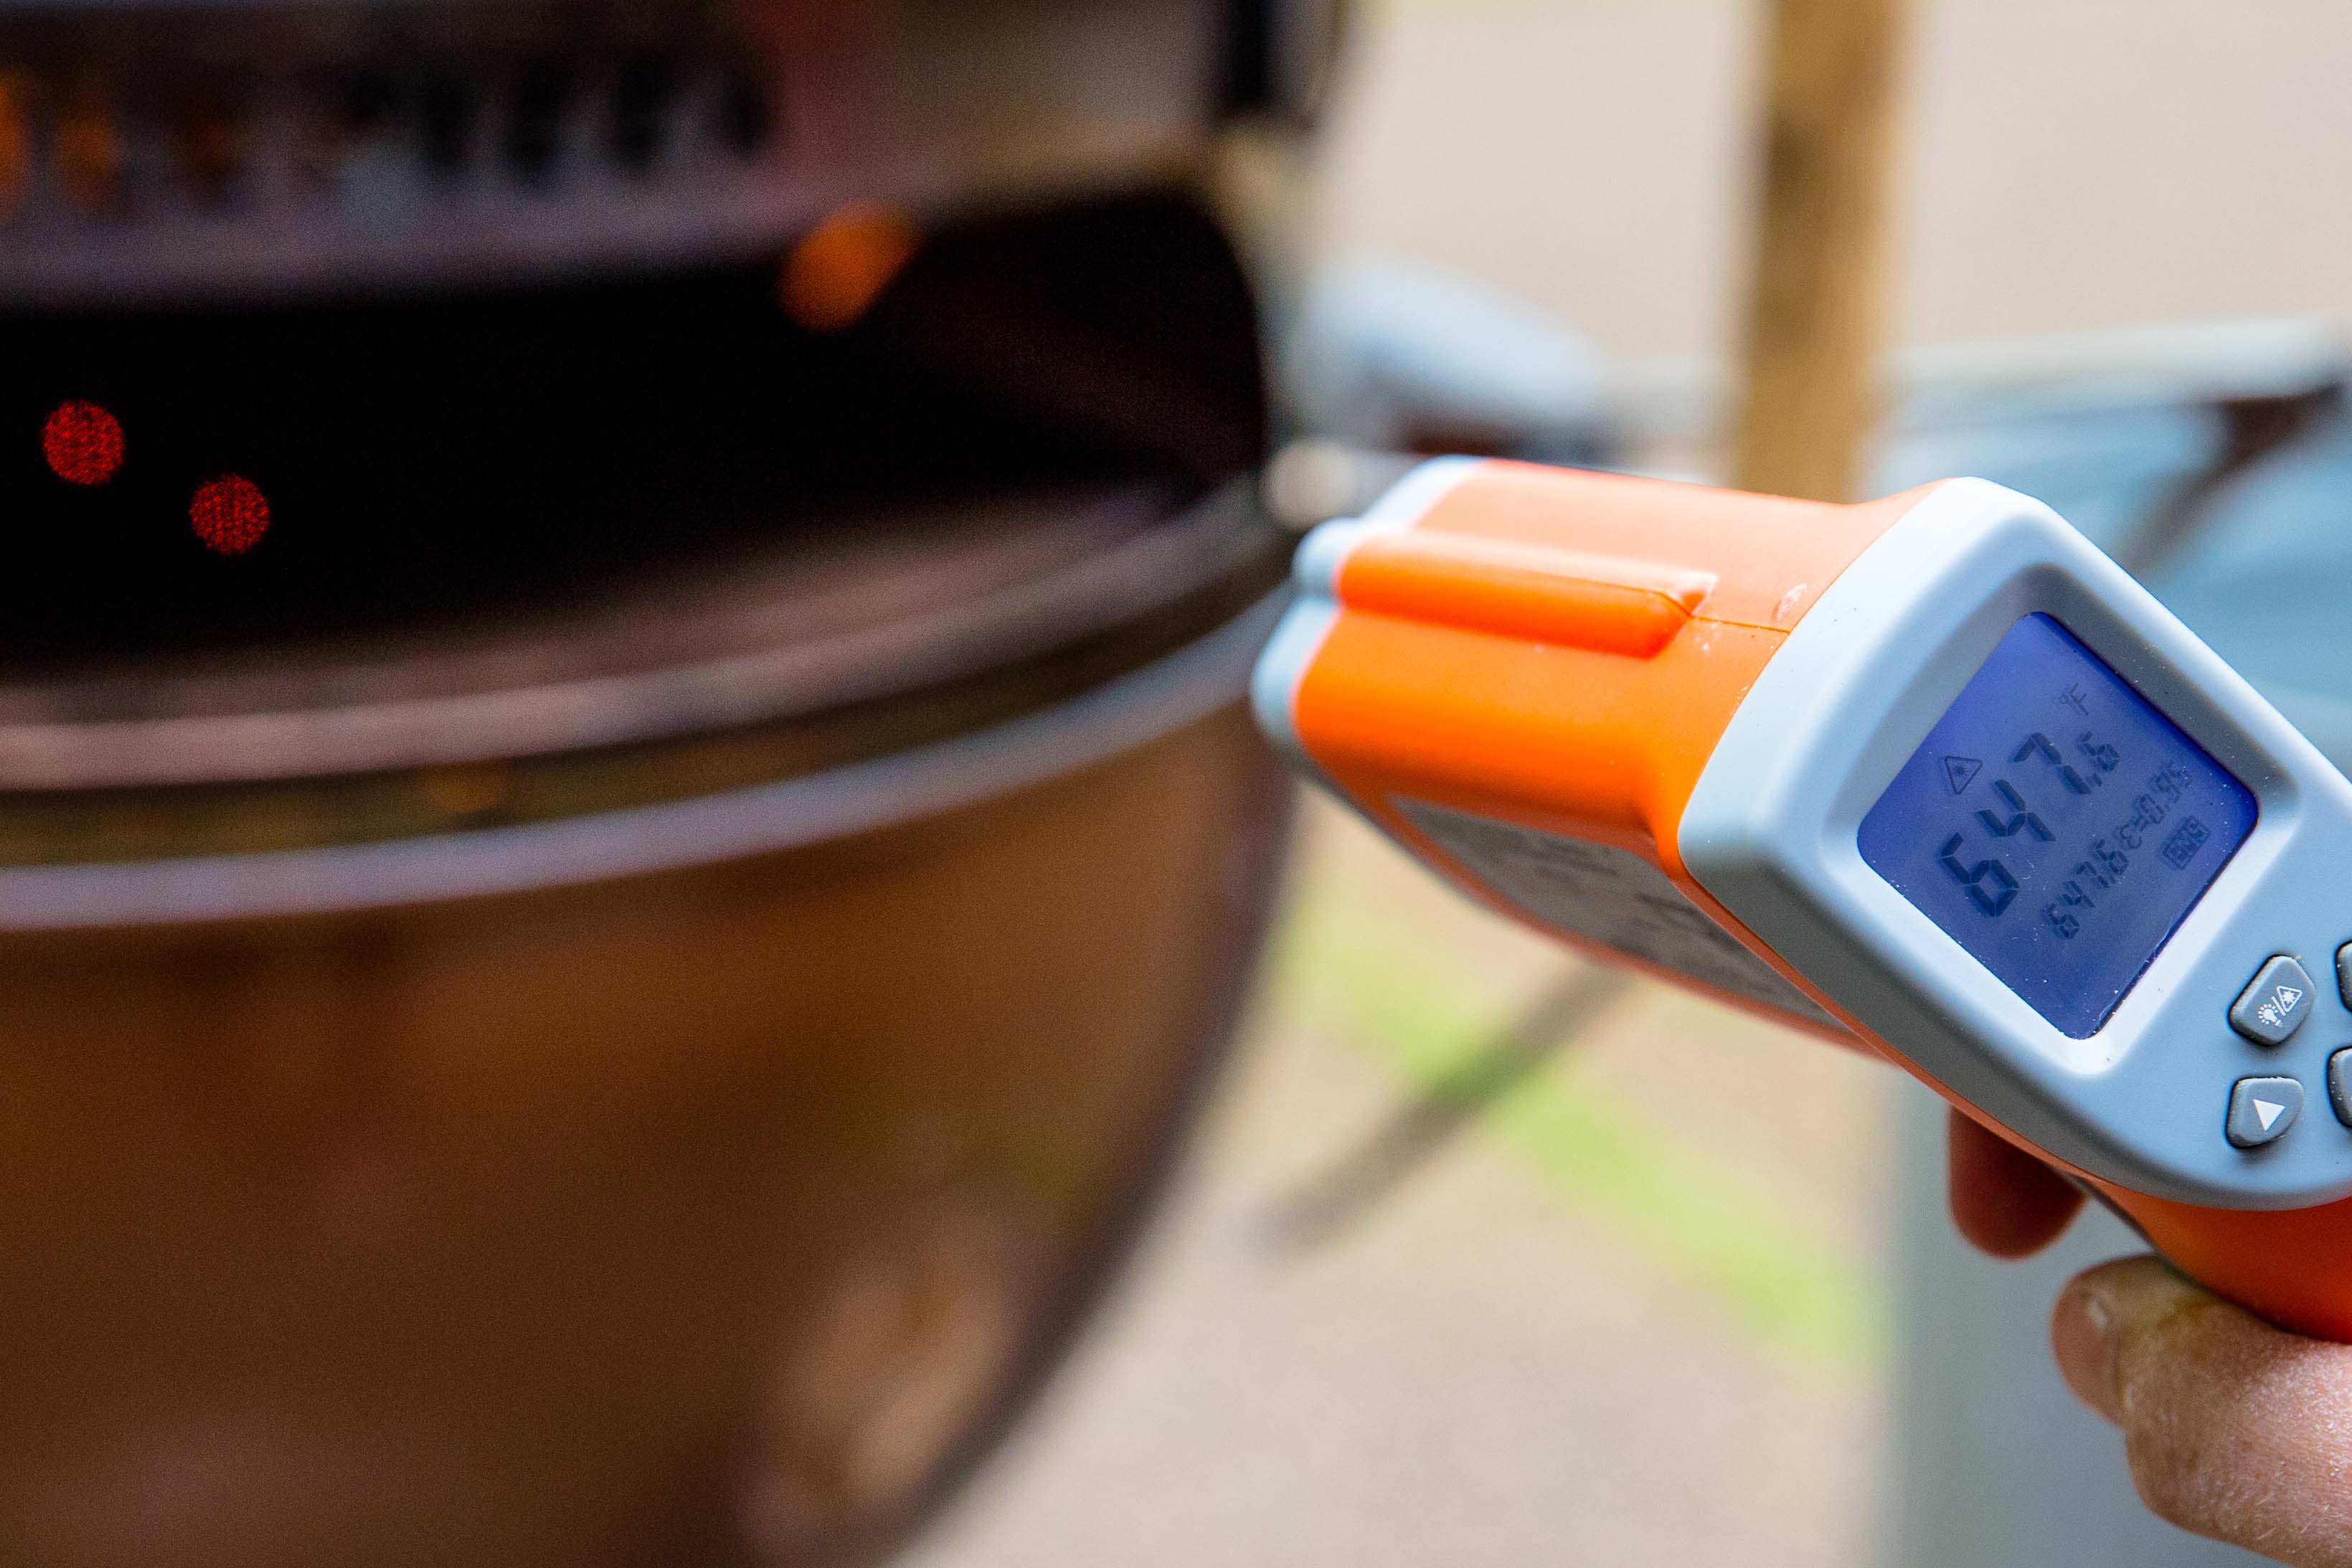 Infrared Thermometer Market 2019 - Industry Outlook and Growth by 2024